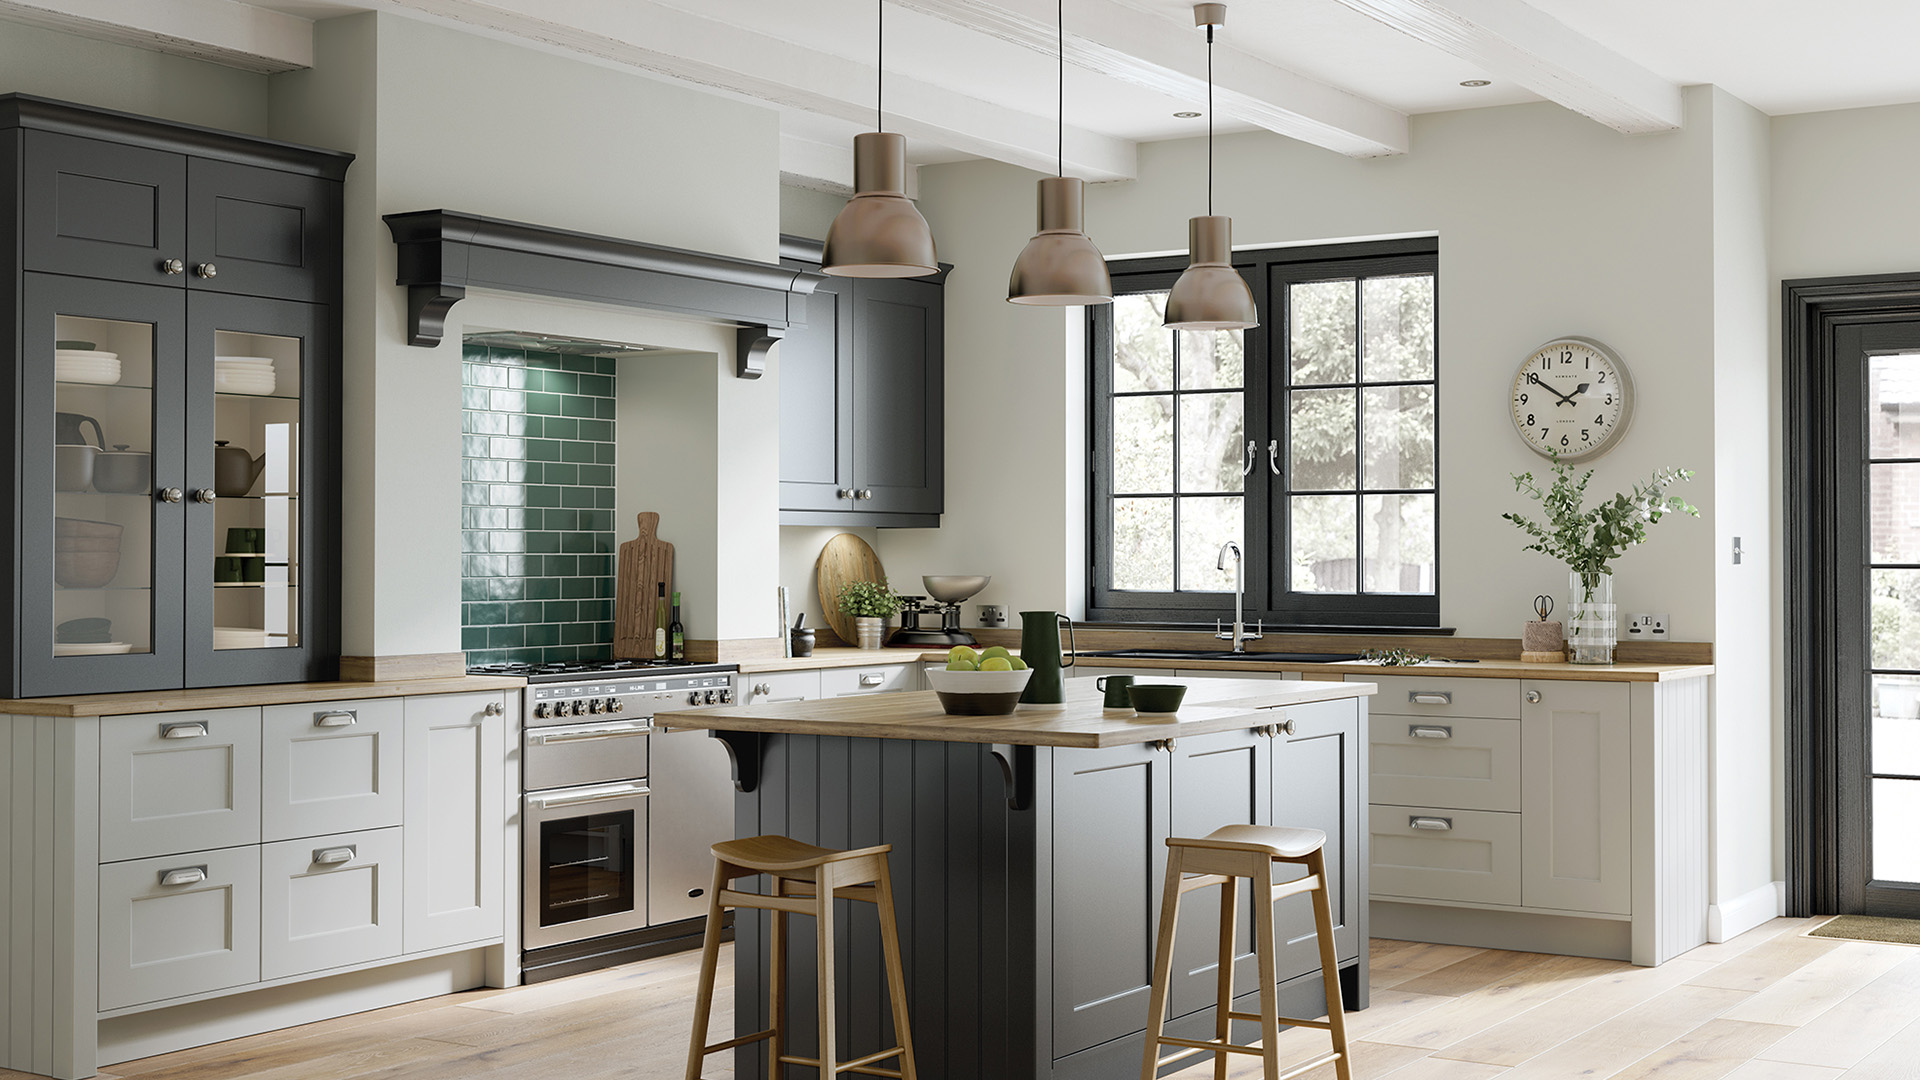 Florence graphite smooth shaker kitchens blending the simplicity of shaker style with the contemporary edge of graphite